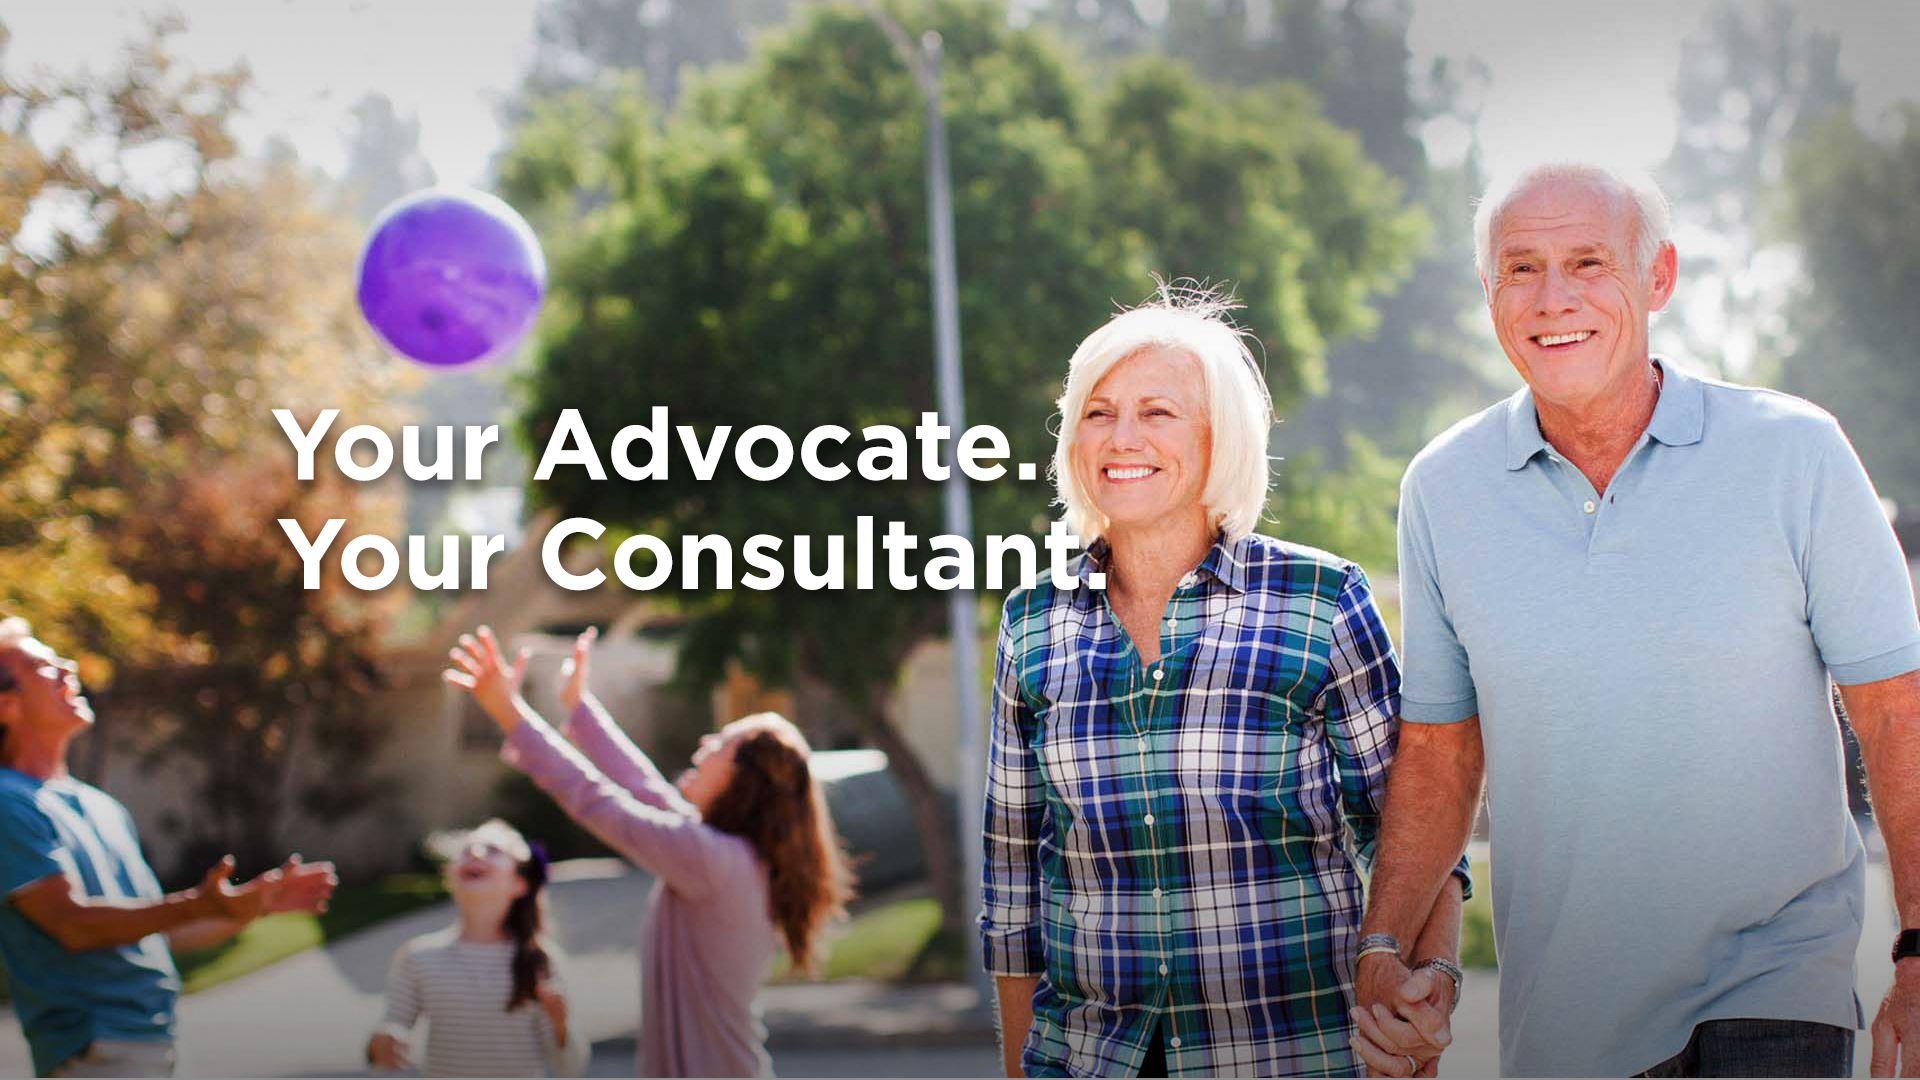 Your Advocate. Your Consultant.